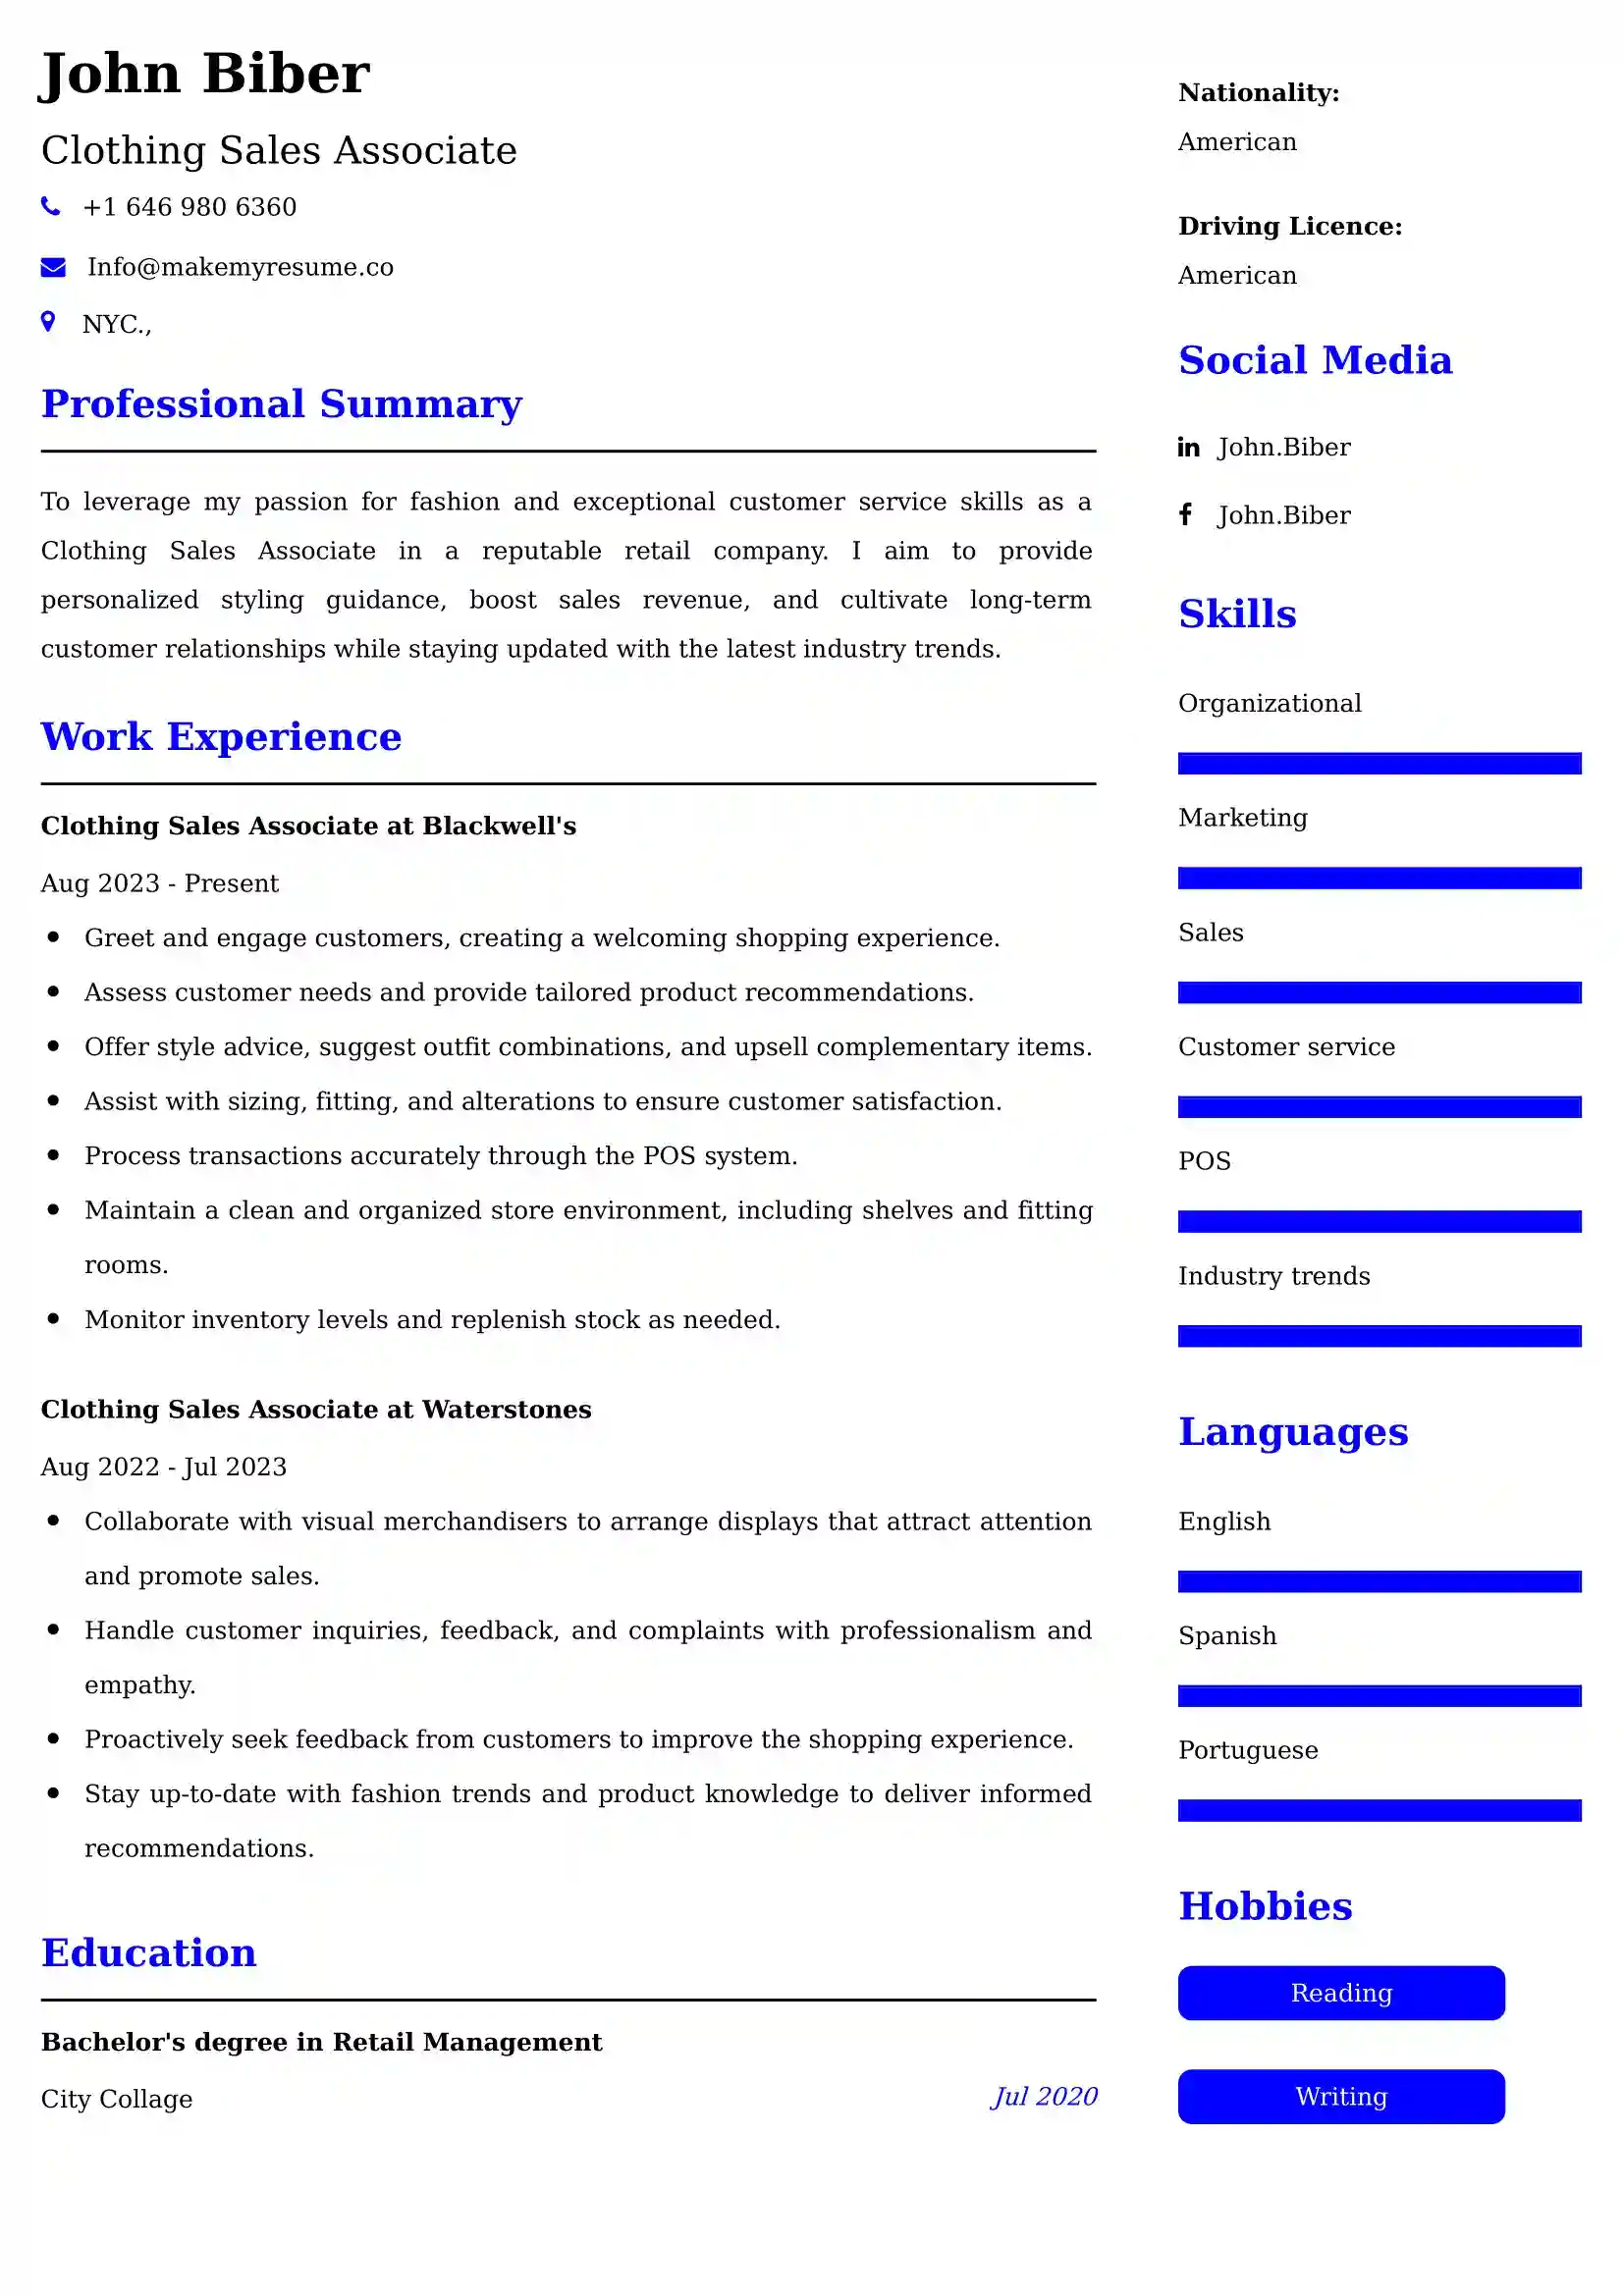 Clothing Sales Associate Resume Examples - Brazilian Format, Latest Template